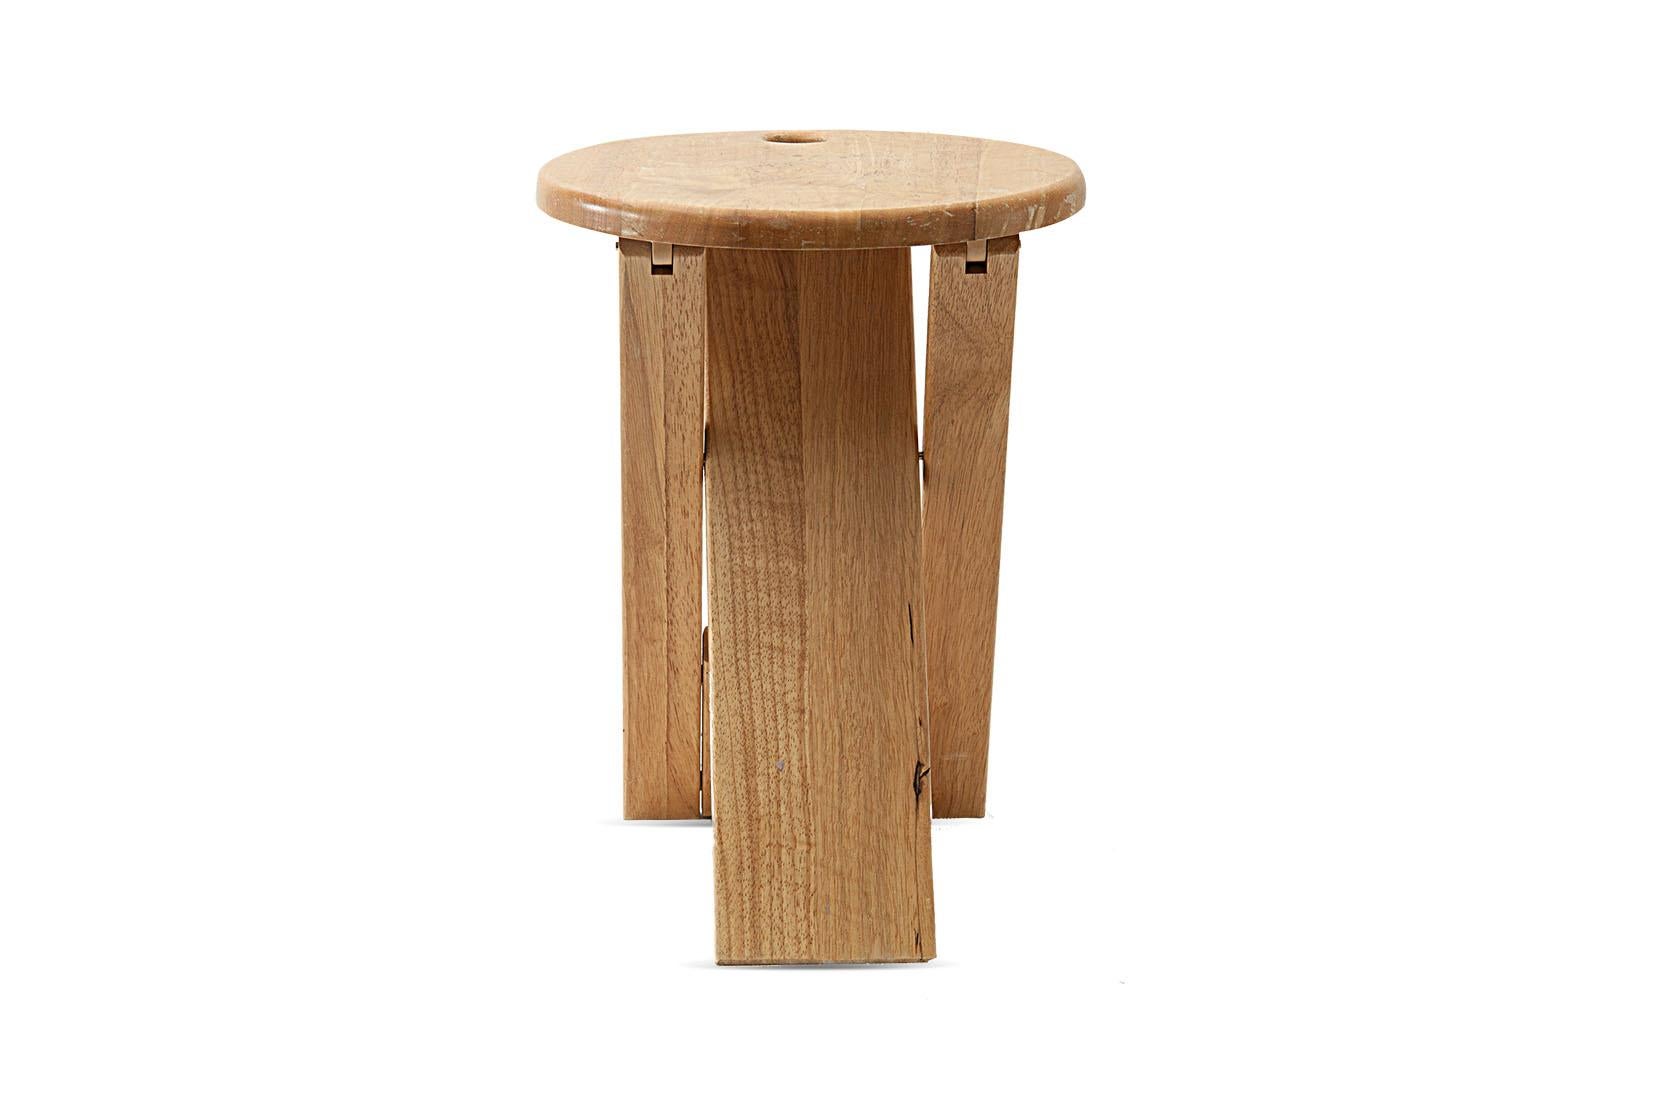 This stool is the model TS by Roger Tallon. It has been made in 1970 for the Santou gallery, in France.
The wood is beechwood, and the stool is foldable.
Approximate measures:
Diameter 30 cm
Height 42 cm.